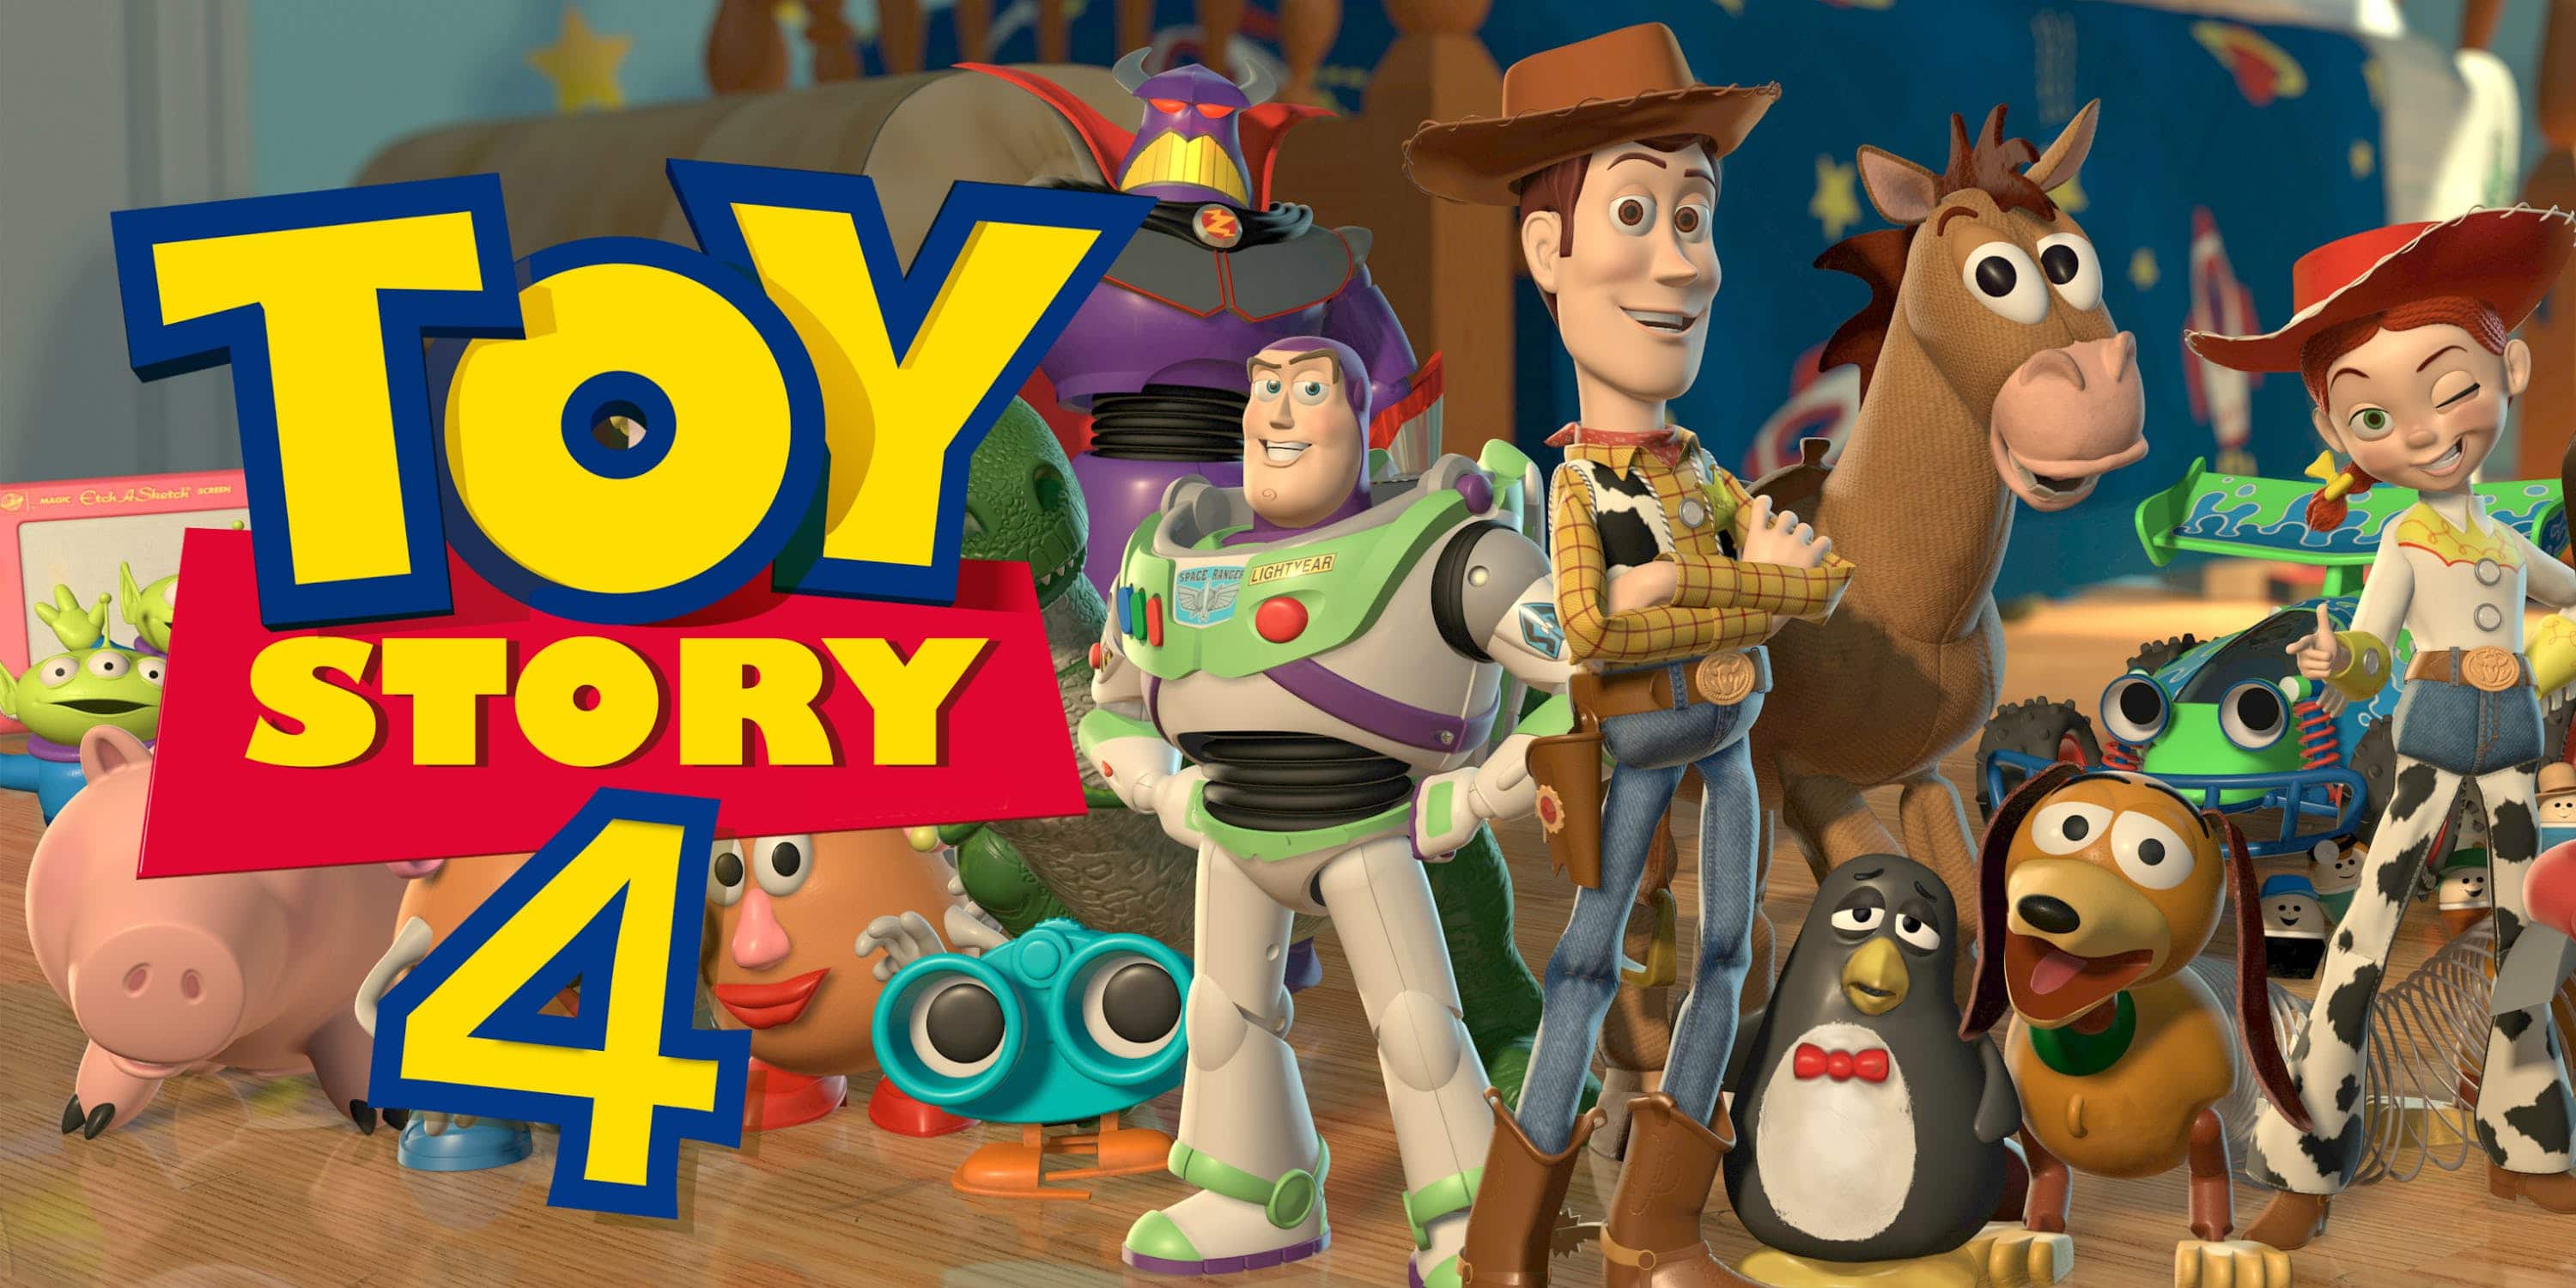 No Negative Reviews for Toy Story 4 on Rotten Tomatoes Yet